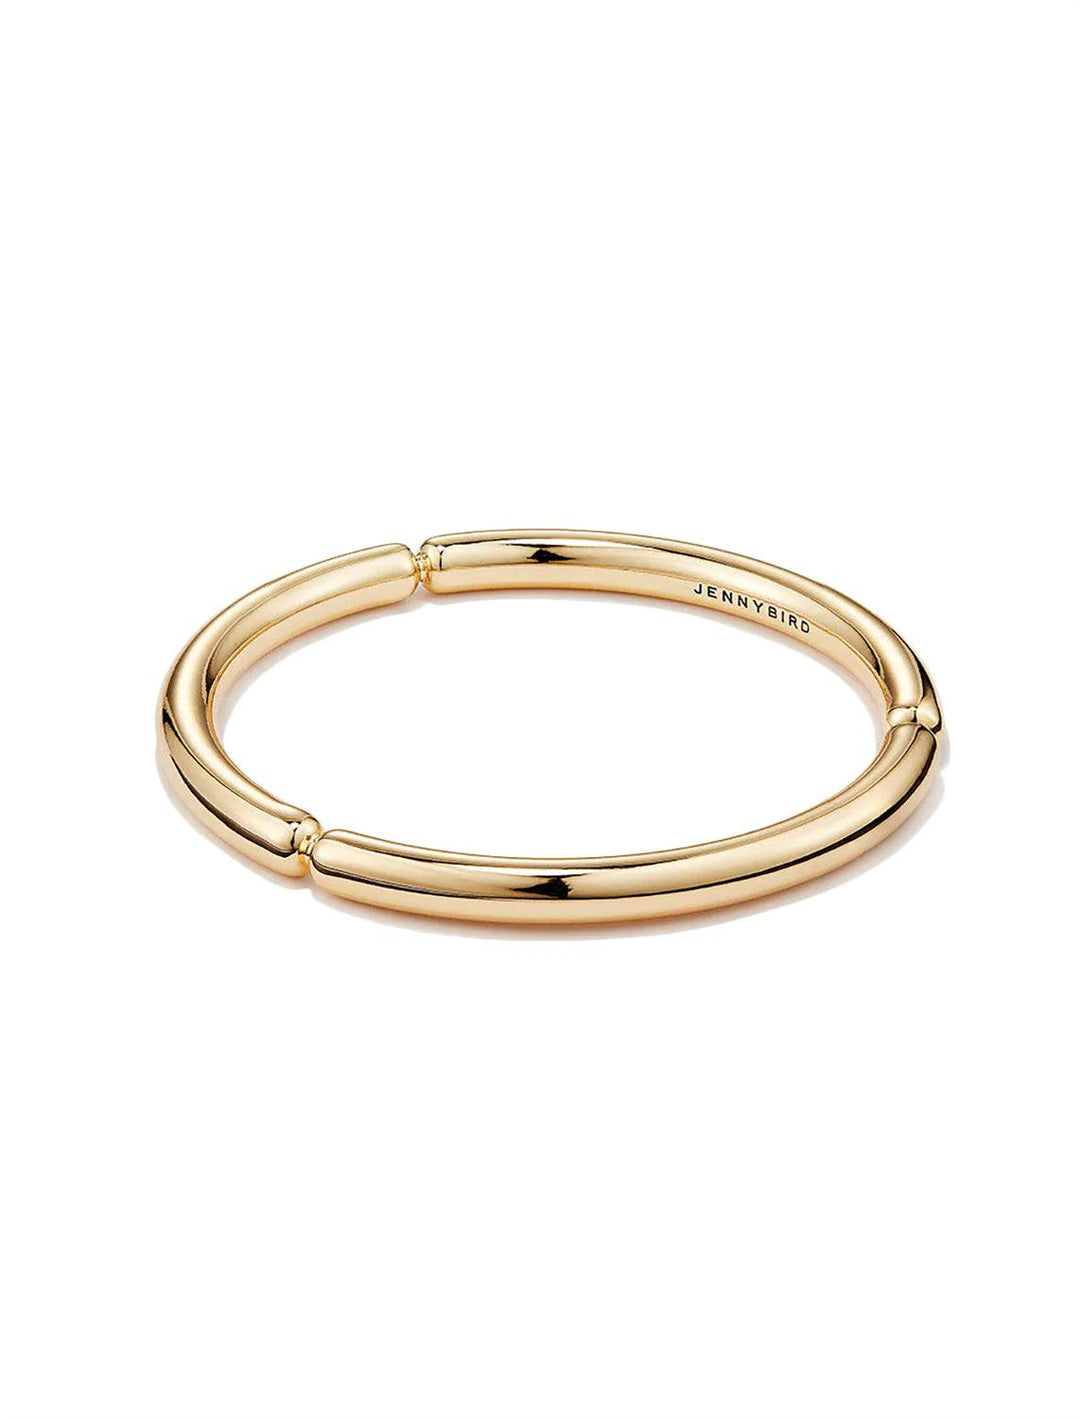 Front angle view of Jenny Bird's Izabella Bangle in Gold Tone Dipped Brass.